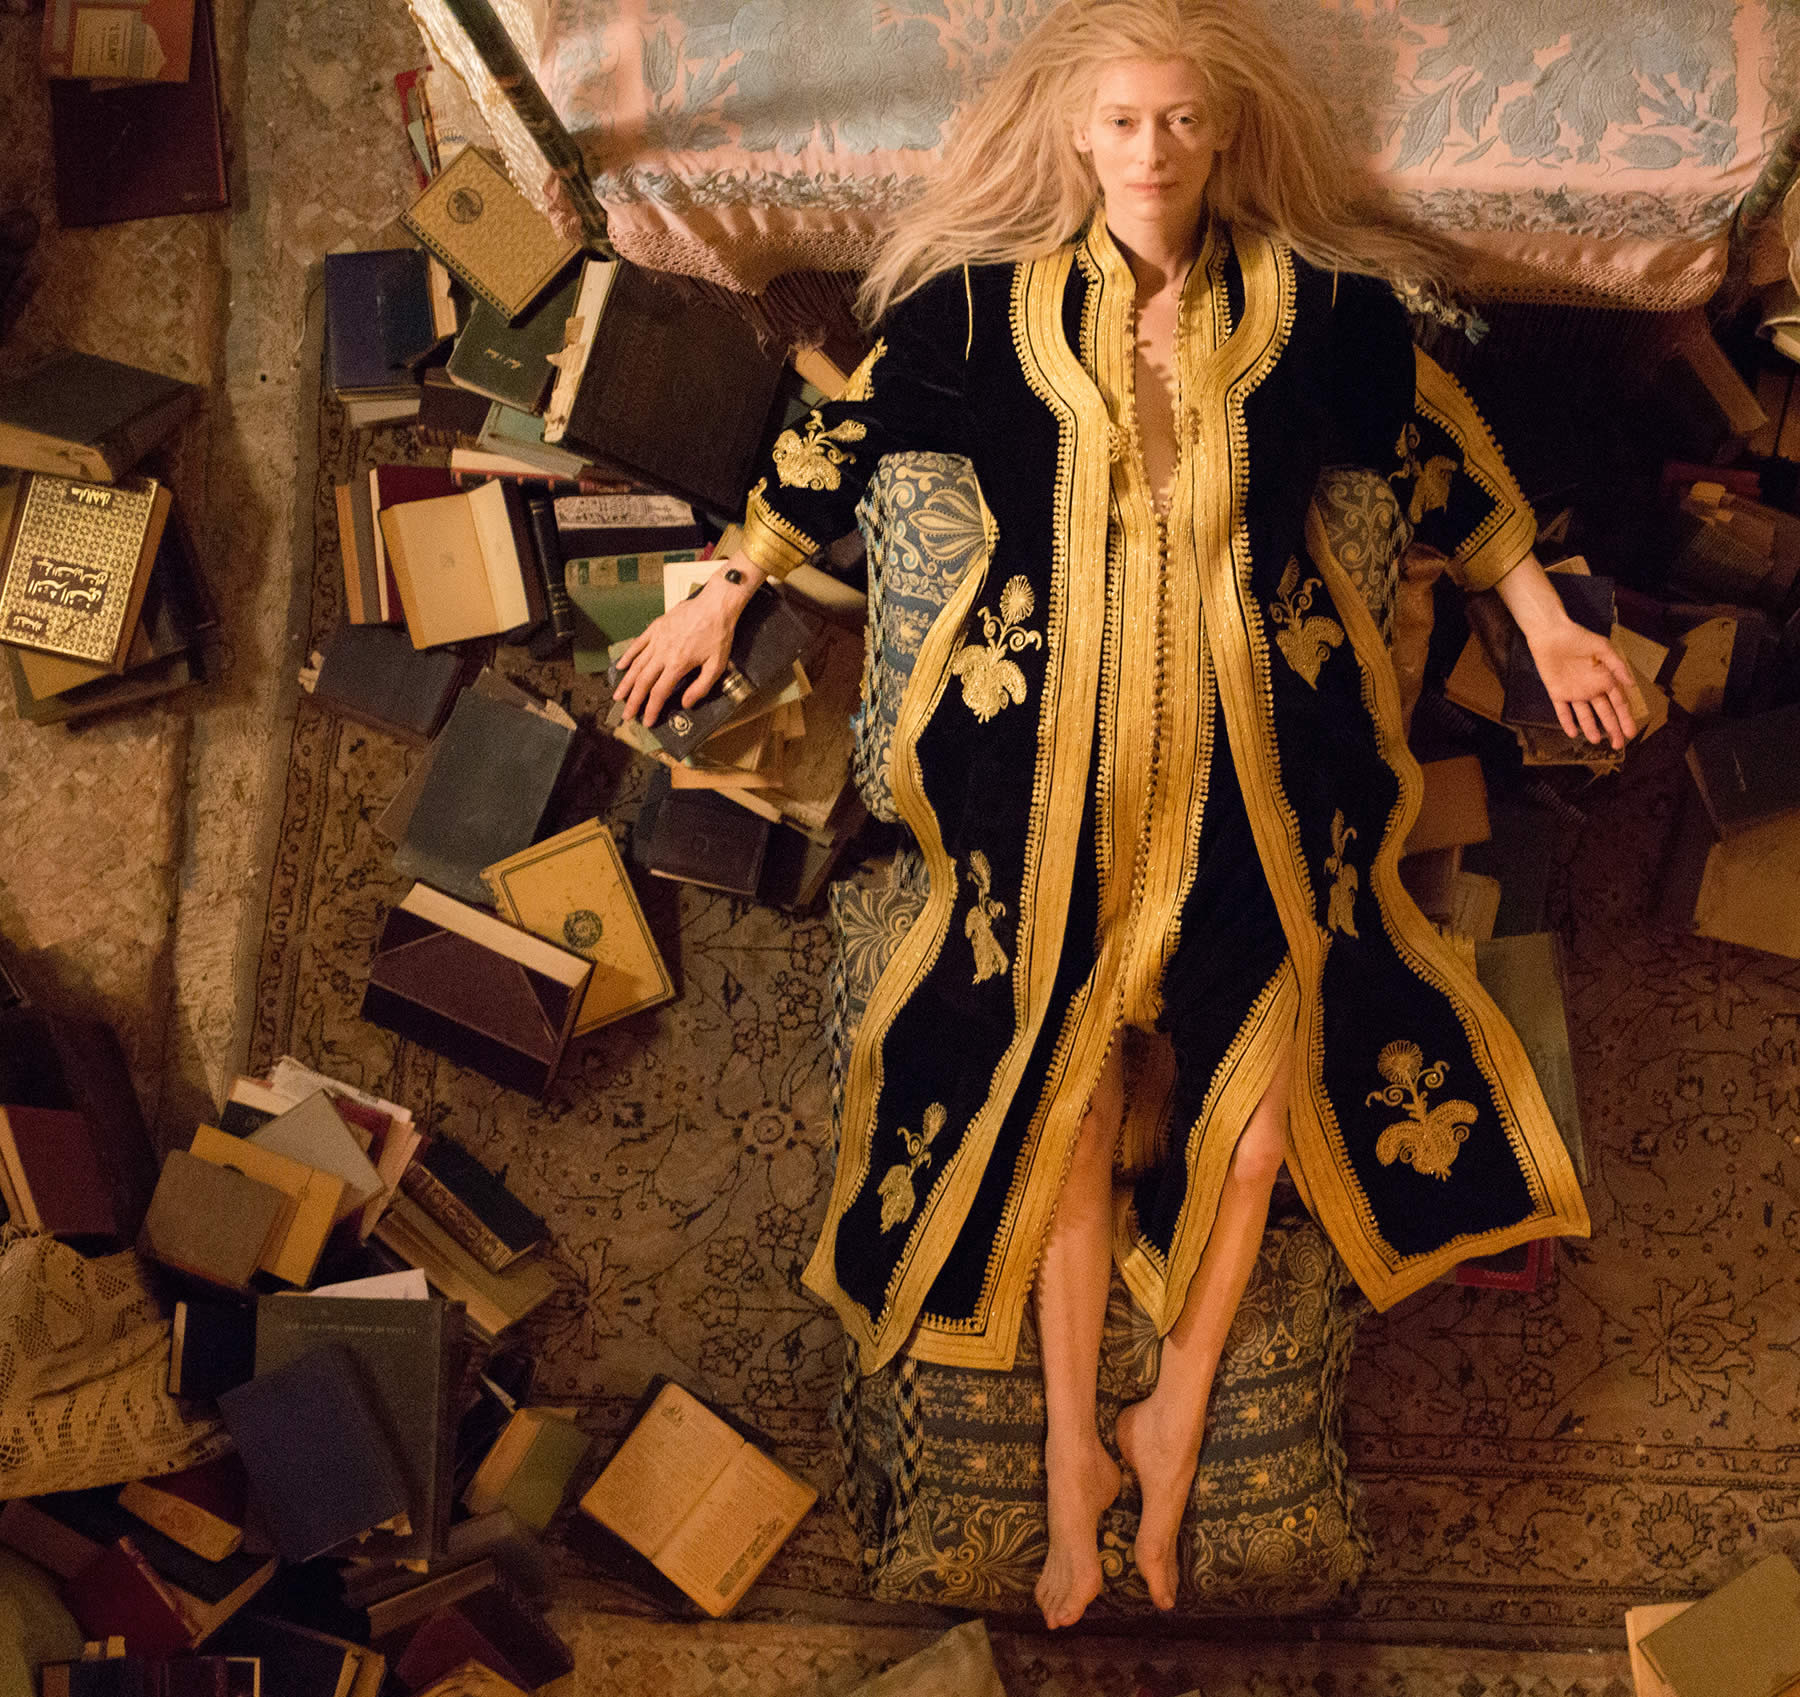 Tilda lying down with books all around, in the only lovers left alive